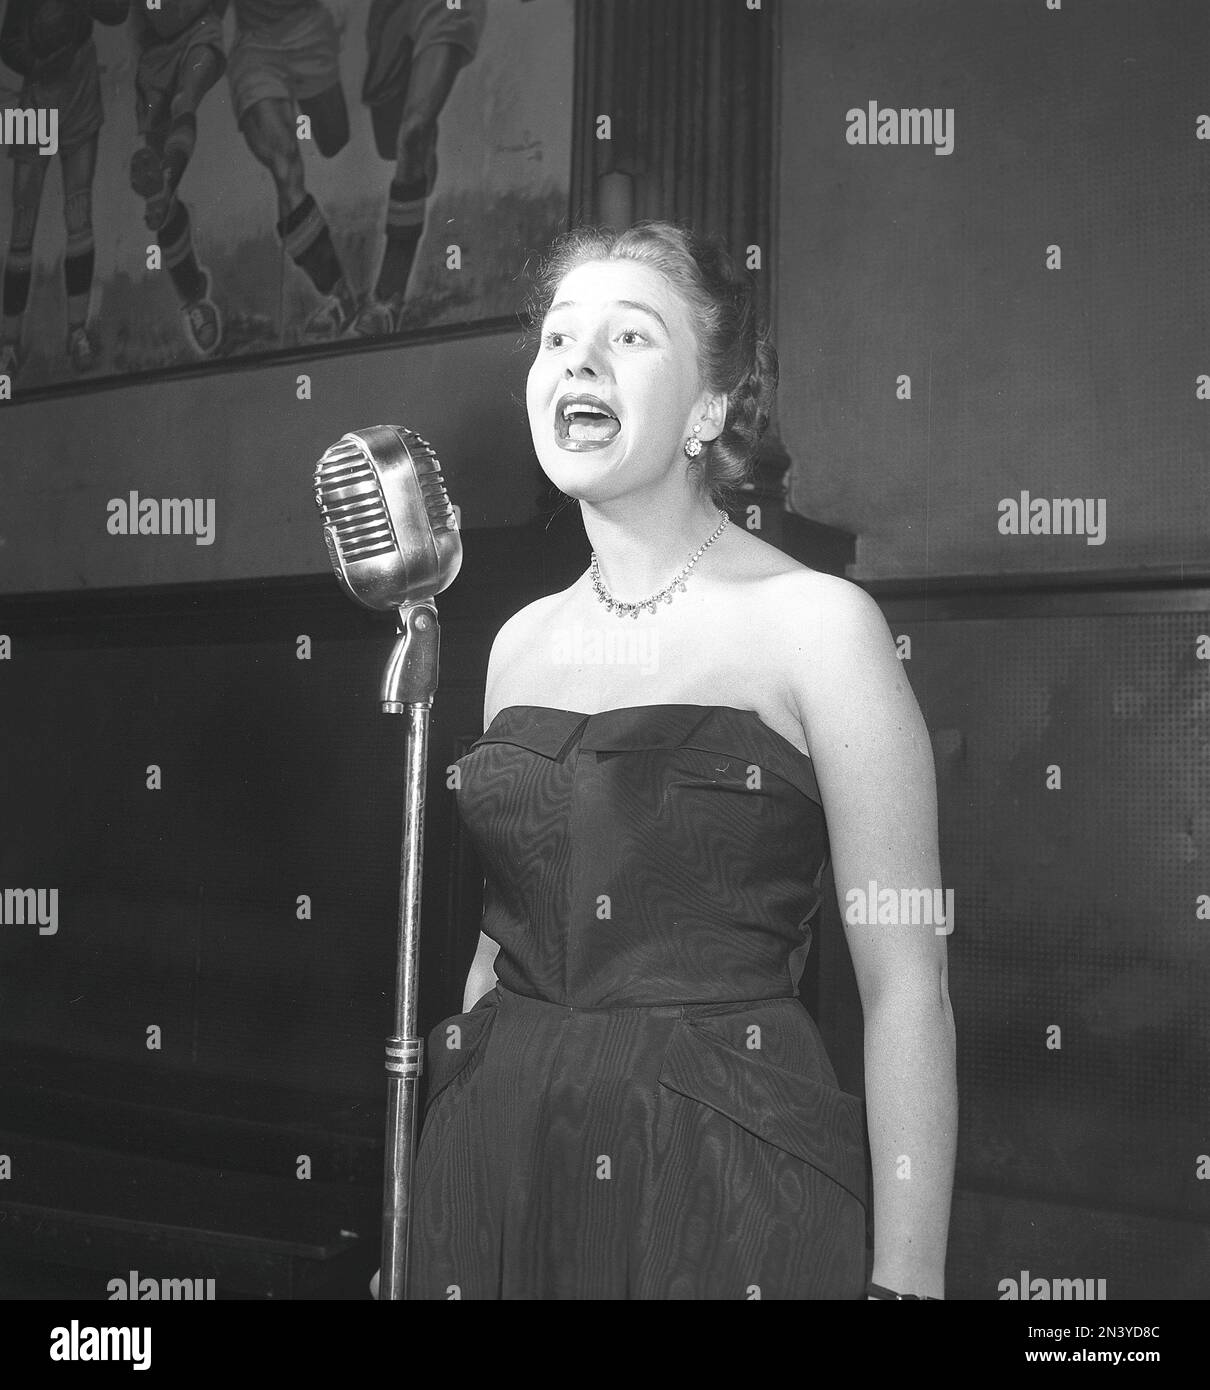 In the 1950s. A young woman seen singing on stage with a microphone in front of her at the dance establishment National shortened by the locals to Nalen. Stockholm Sweden 1952 Kristoffersson ref BF15-4 Stock Photo